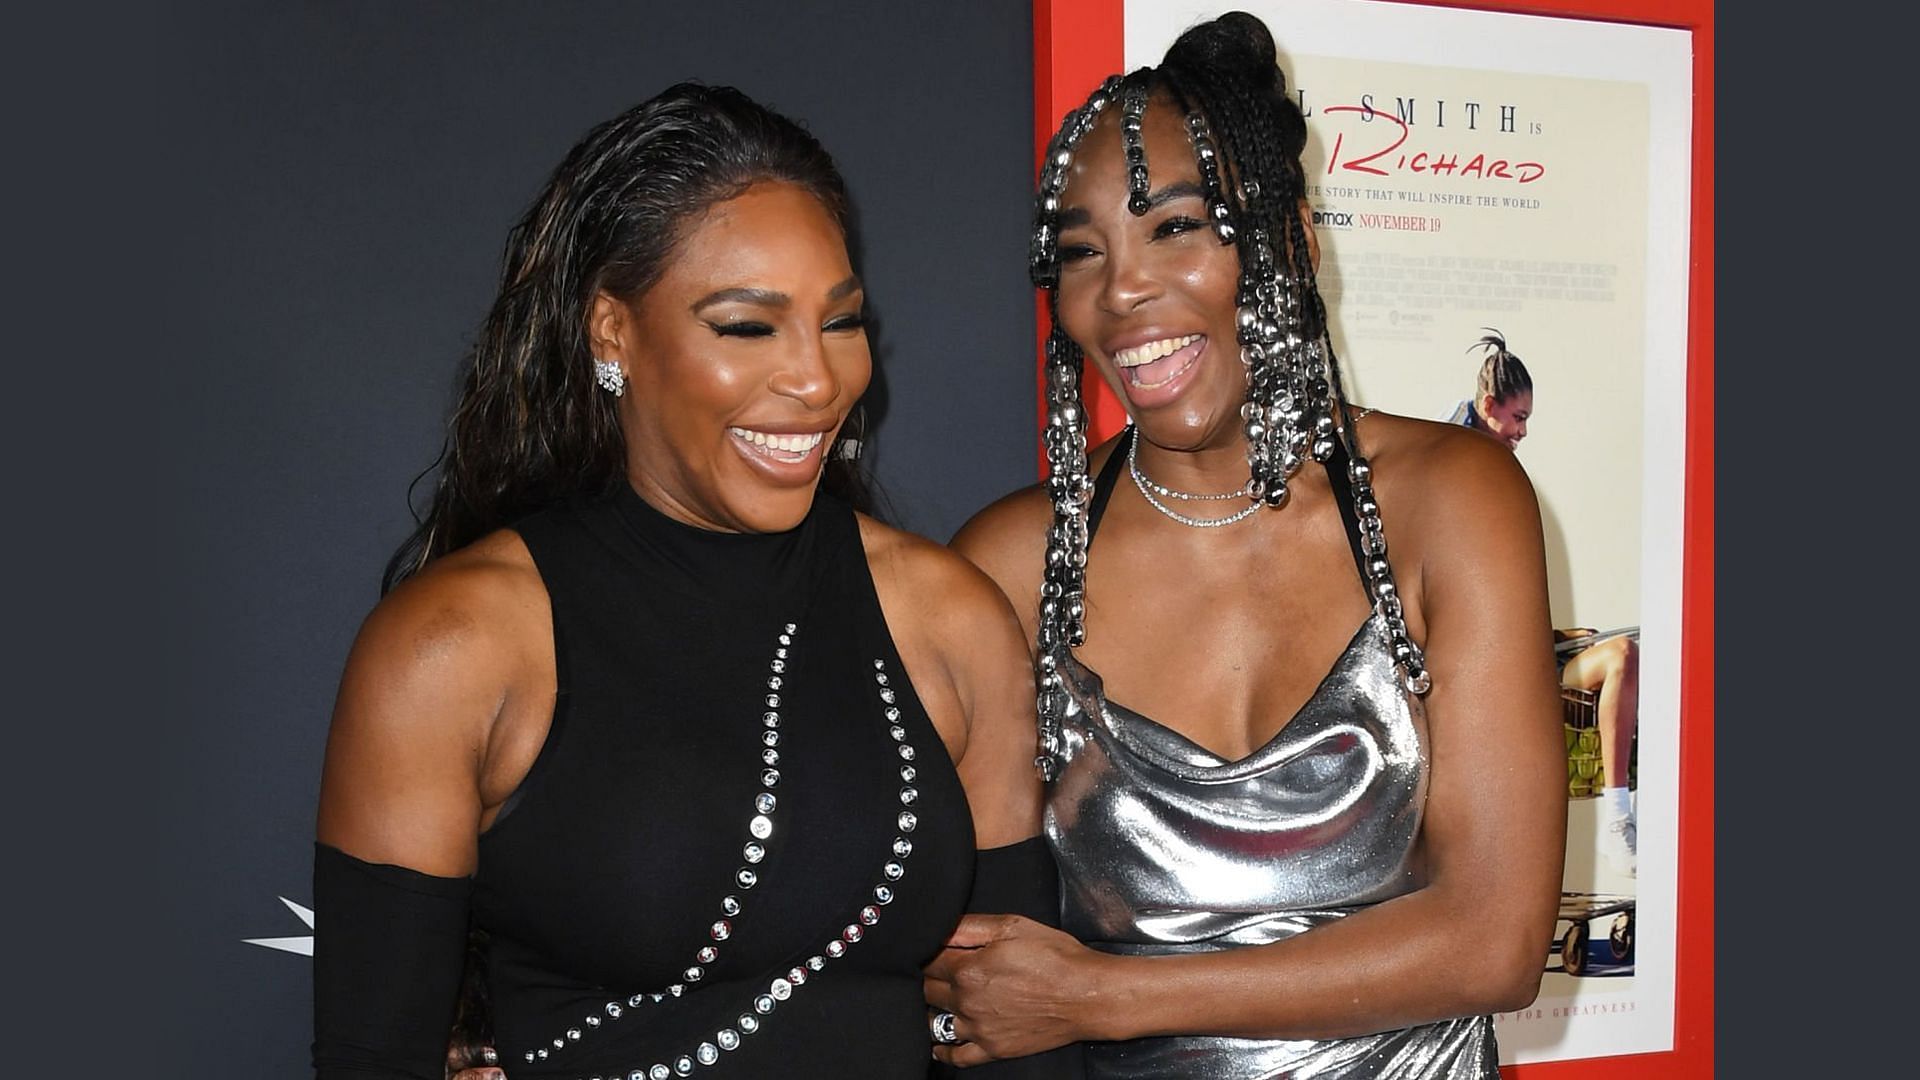 Venus Williams jokes about permanently disinviting Serena Williams from her house after accusations of theft